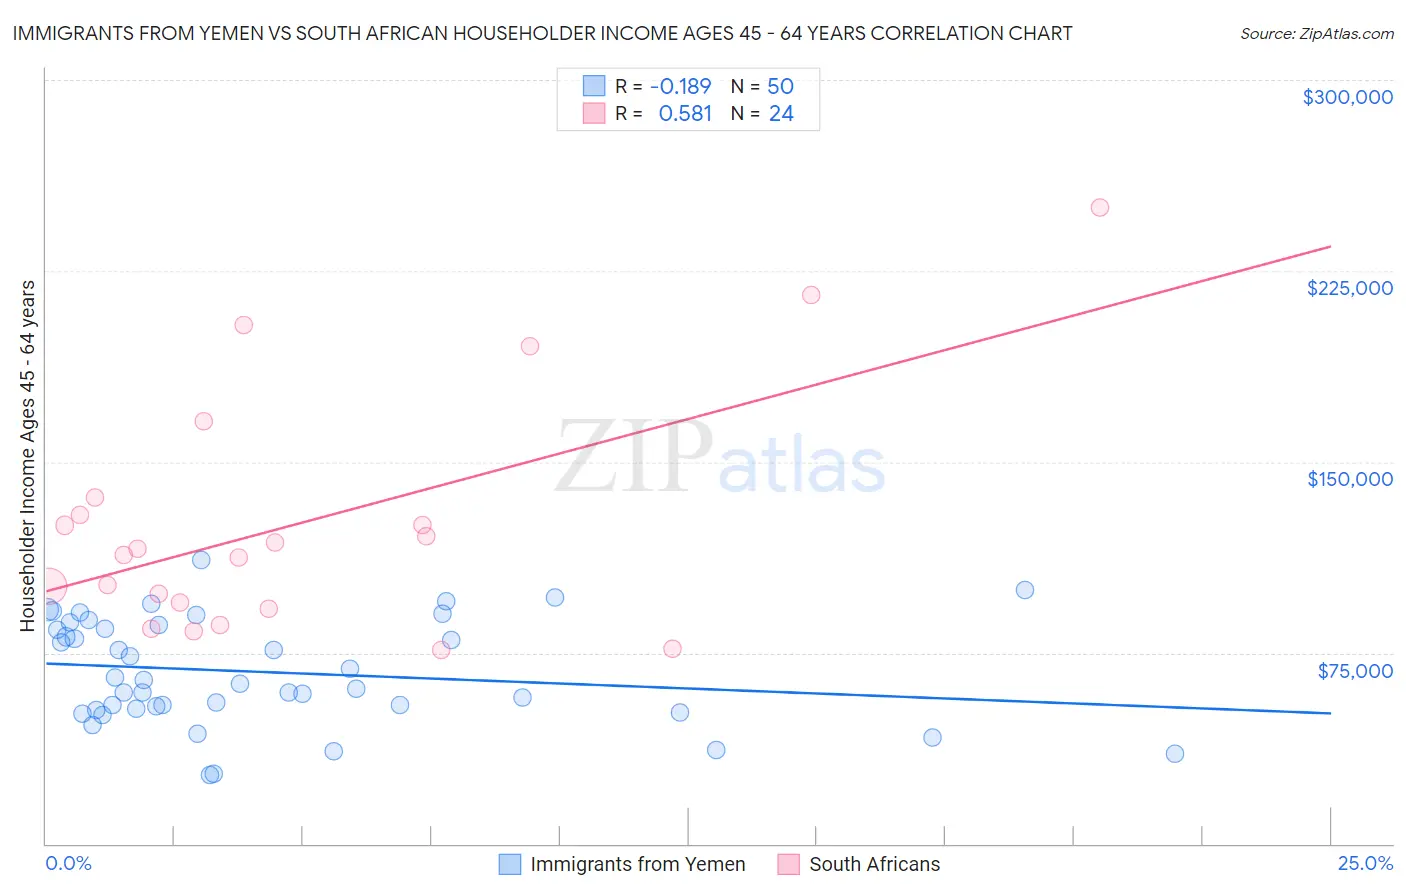 Immigrants from Yemen vs South African Householder Income Ages 45 - 64 years